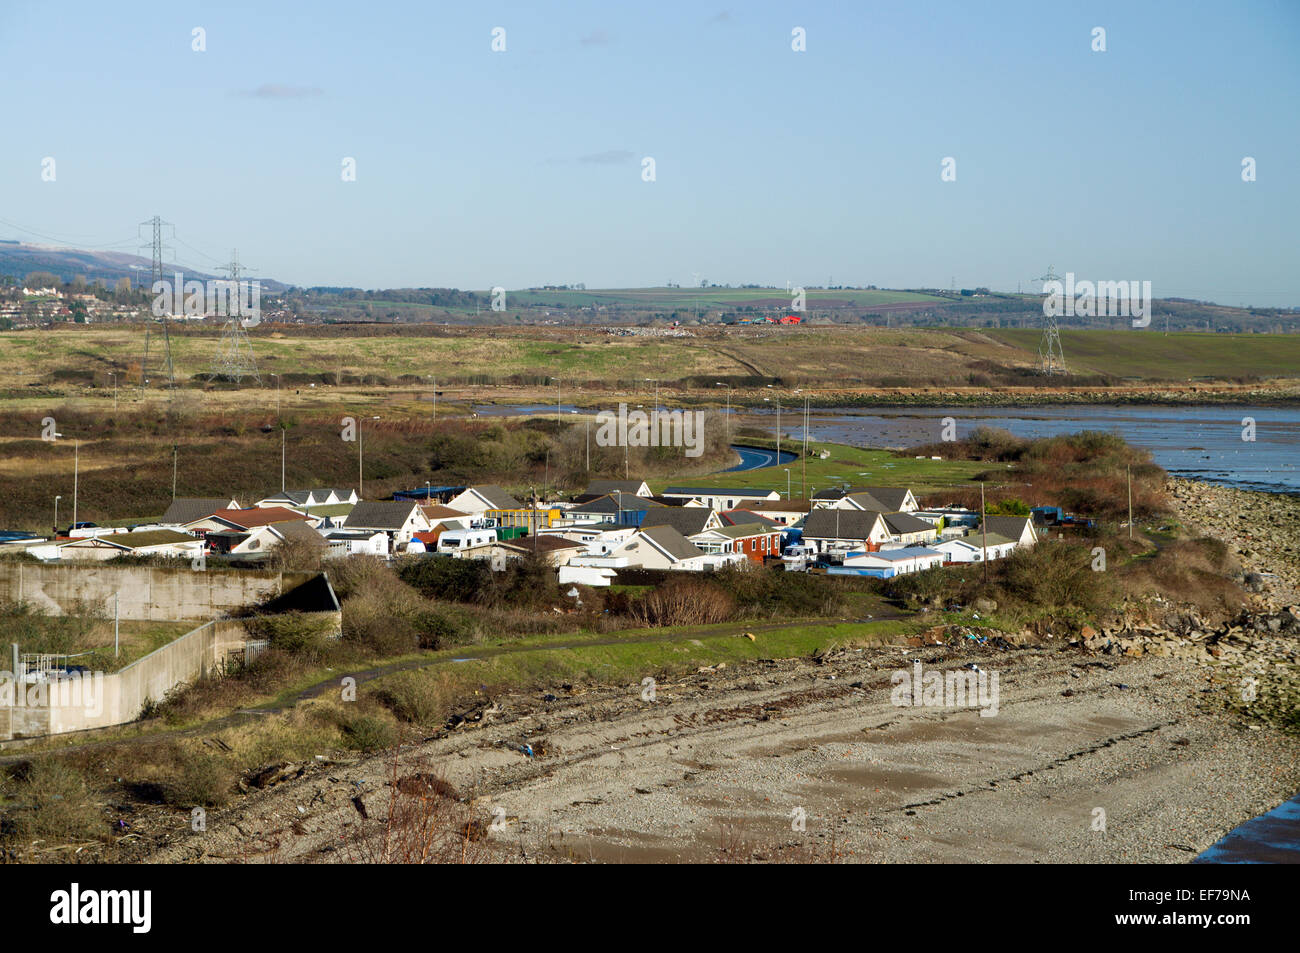 Travelers site, Rover Way, Cardiff, South Wales, UK. Stock Photo